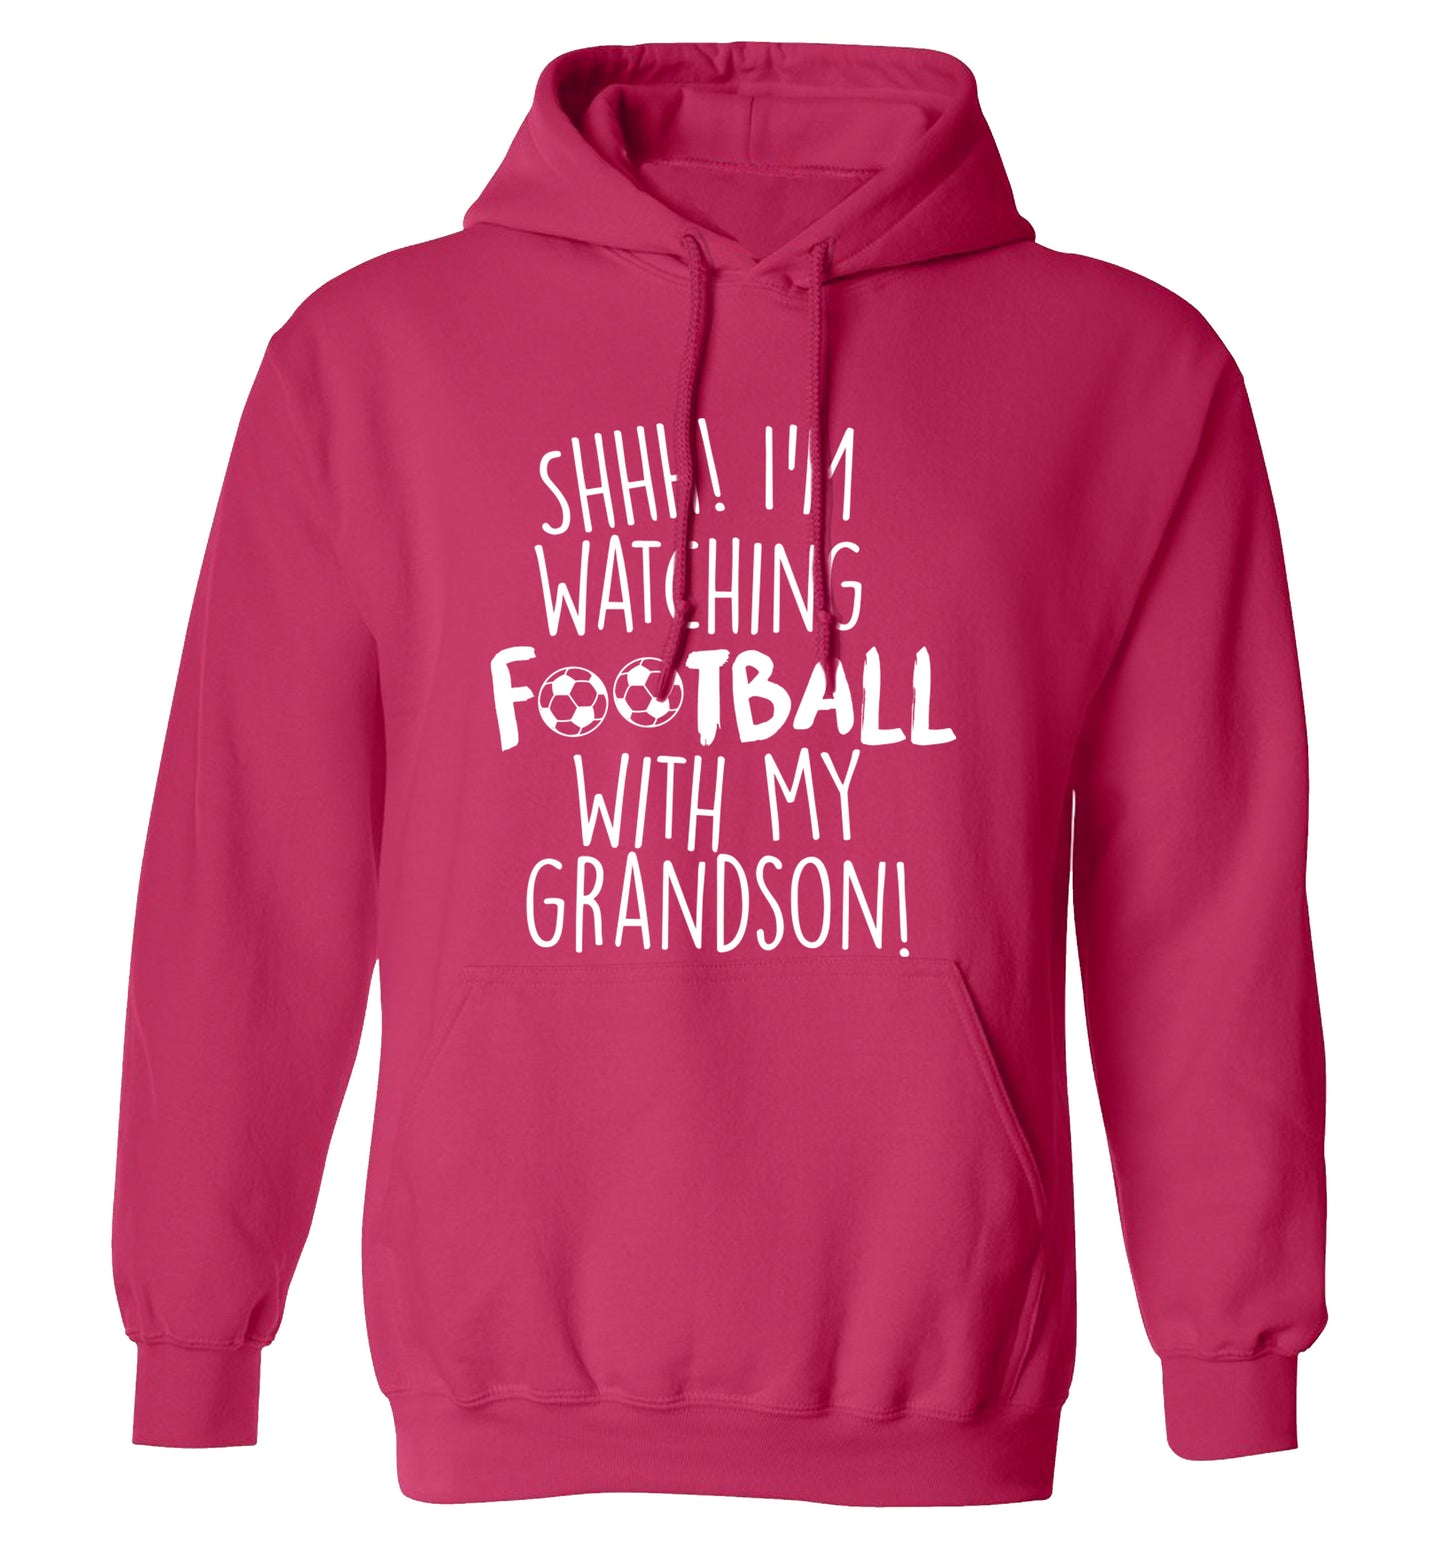 Shhh I'm watching football with my grandson adults unisexpink hoodie 2XL